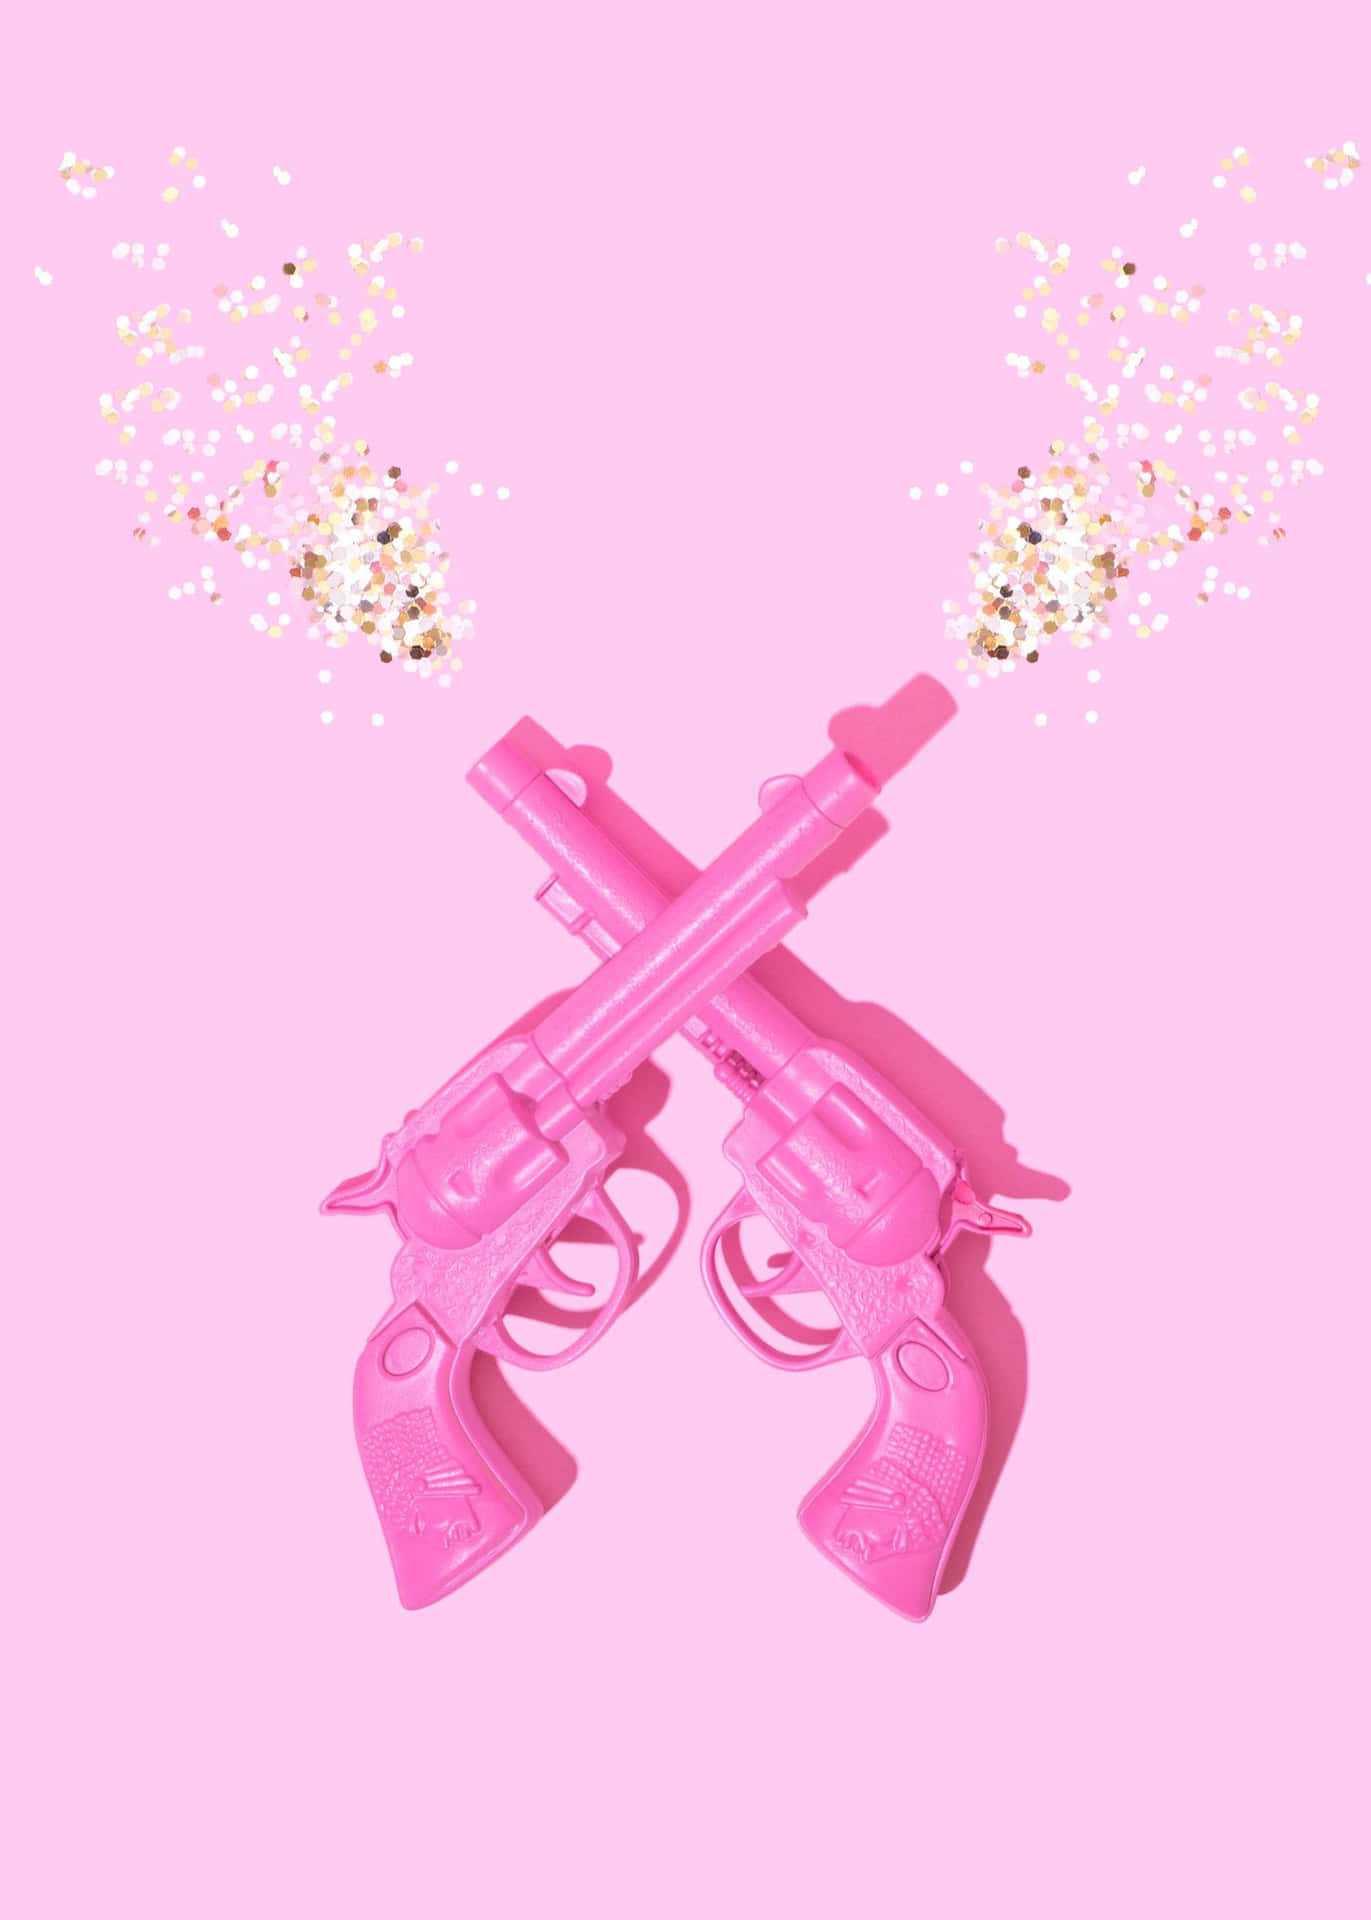 Pink Crossed Pistolswith Sparkles Wallpaper